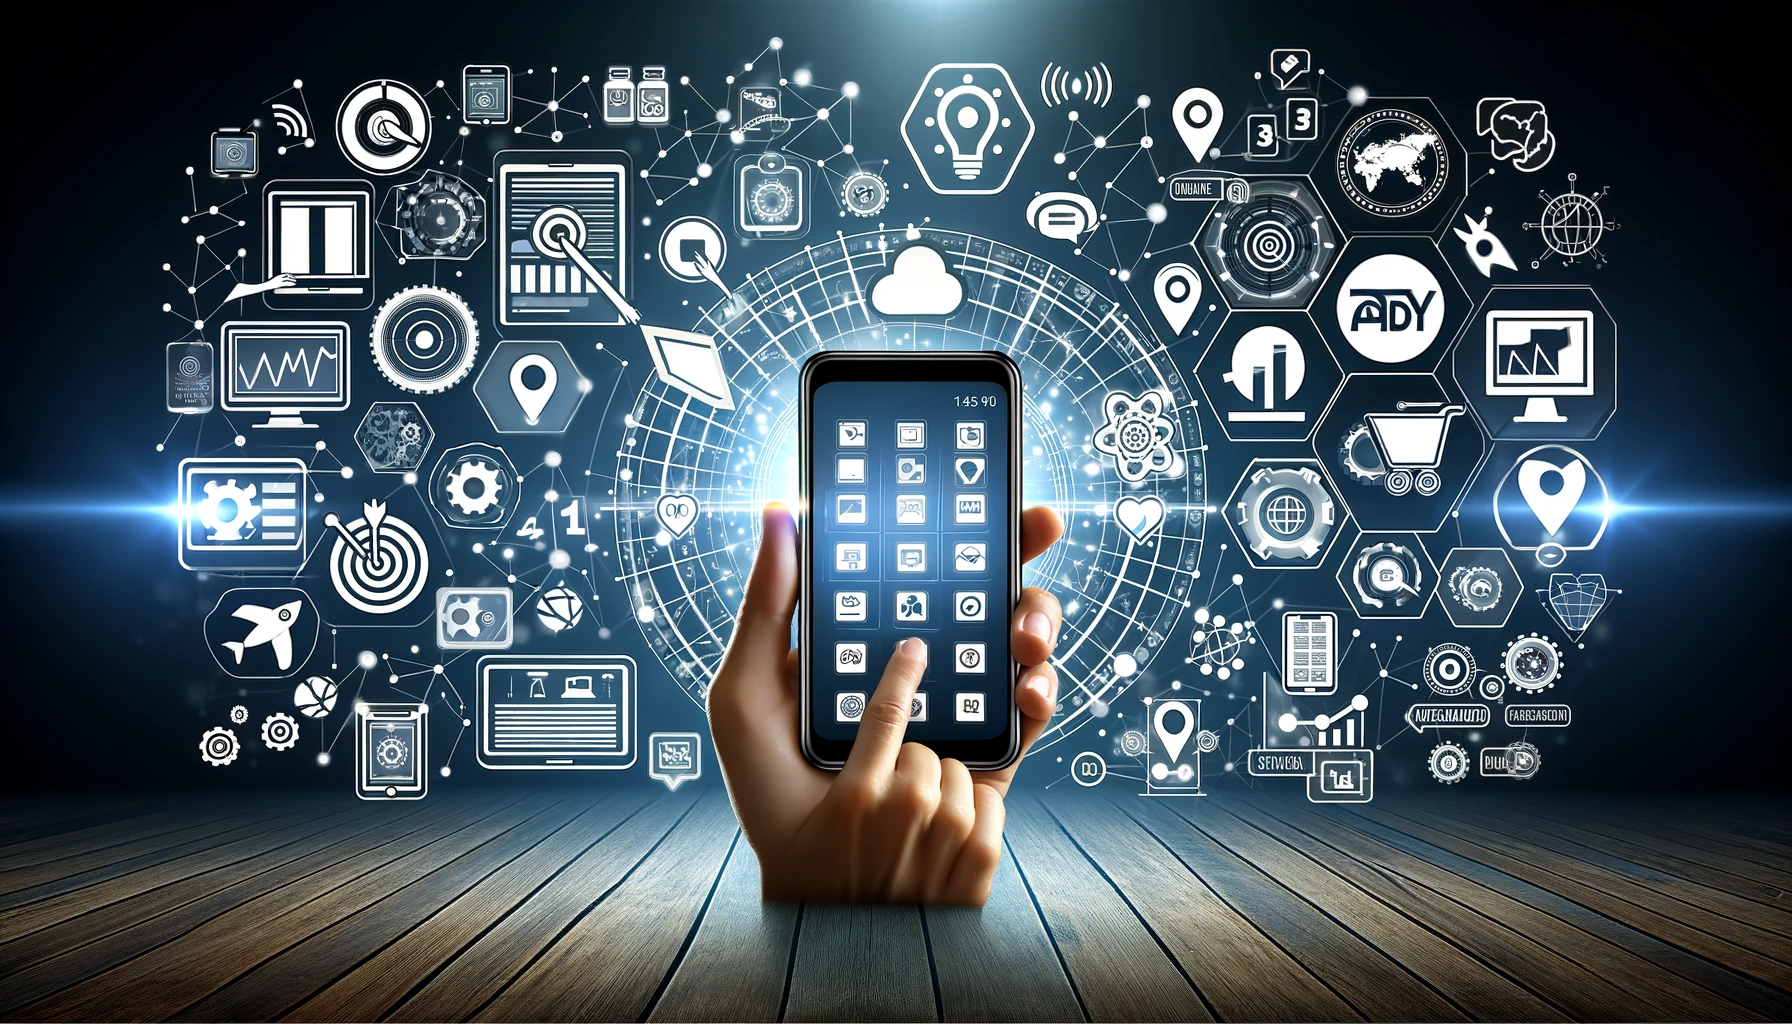 Wide image depicting various mobile devices with different ads, surrounded by icons representing targeting, data analytics, and user engagement, highlighting innovative mobile advertising strategies.